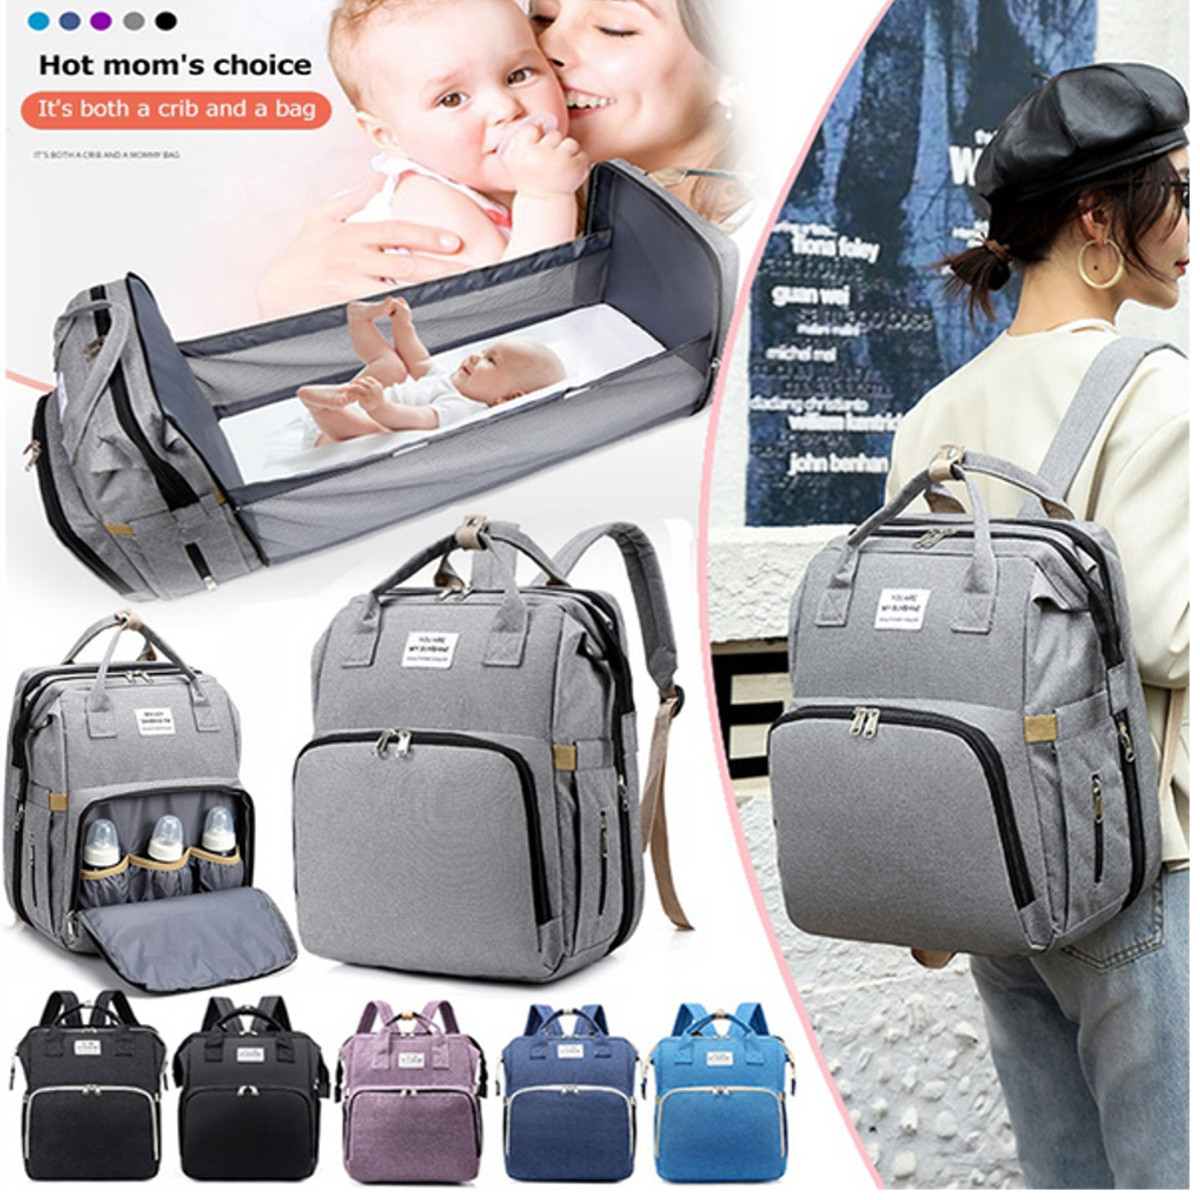 Multifunctional-Waterproof-Mummy-Bag-Portable-Diaper-Bag-Large-capacity-Folding-Bed-Bag-Out-of-bed-B-1916752-1